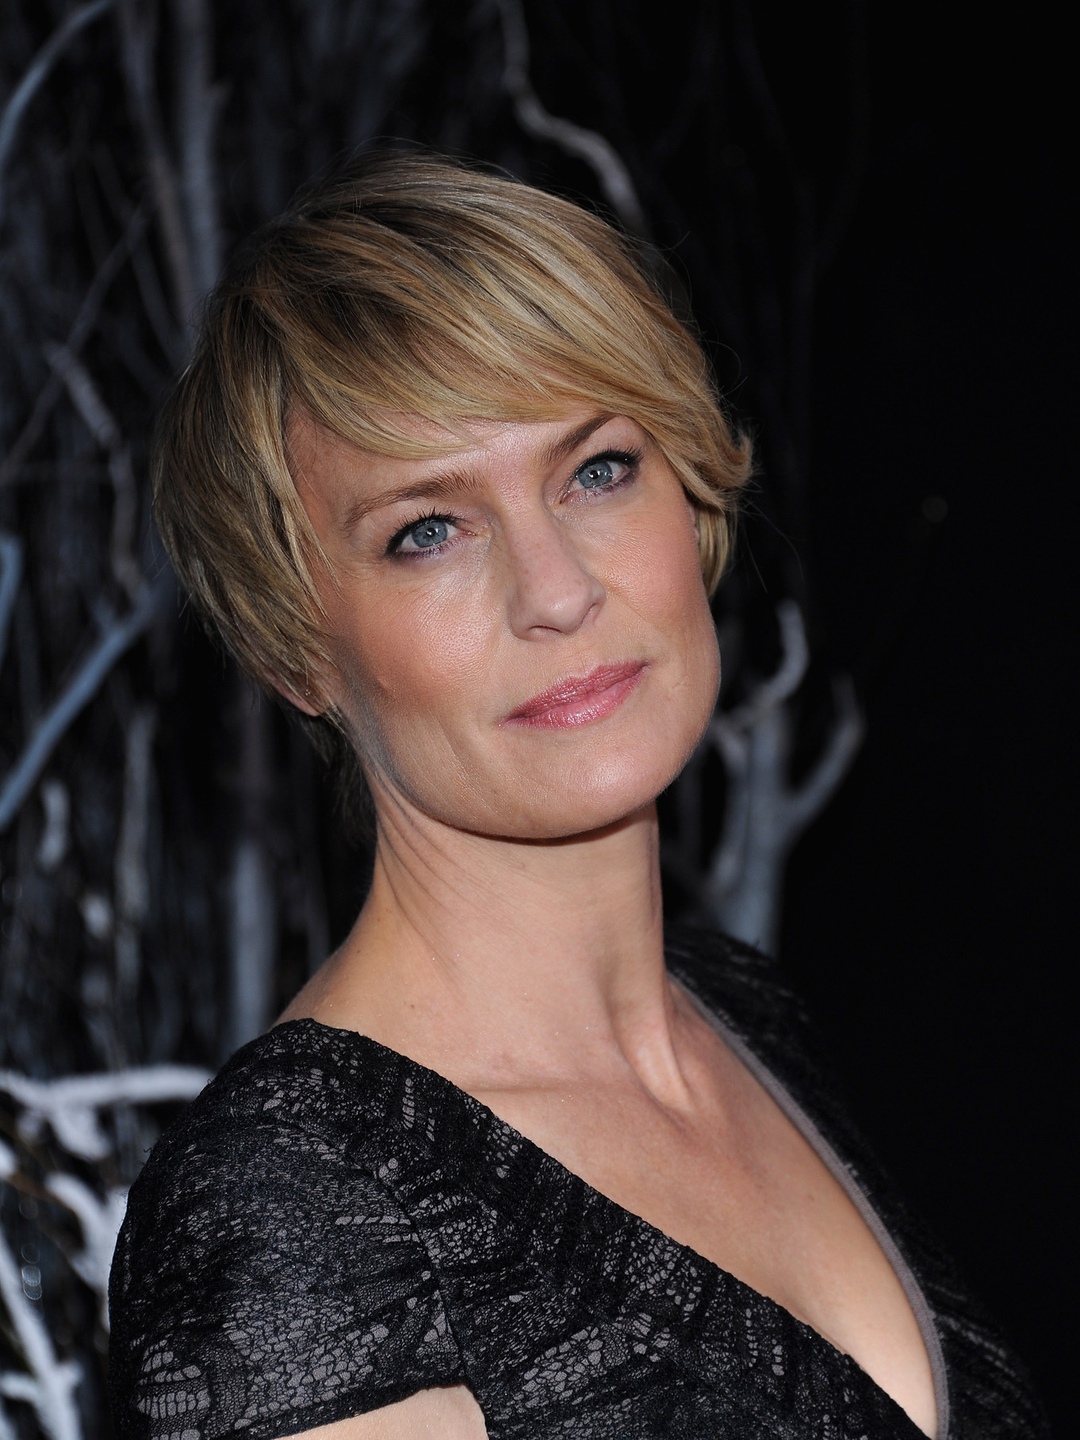 Robin Wright who is her father